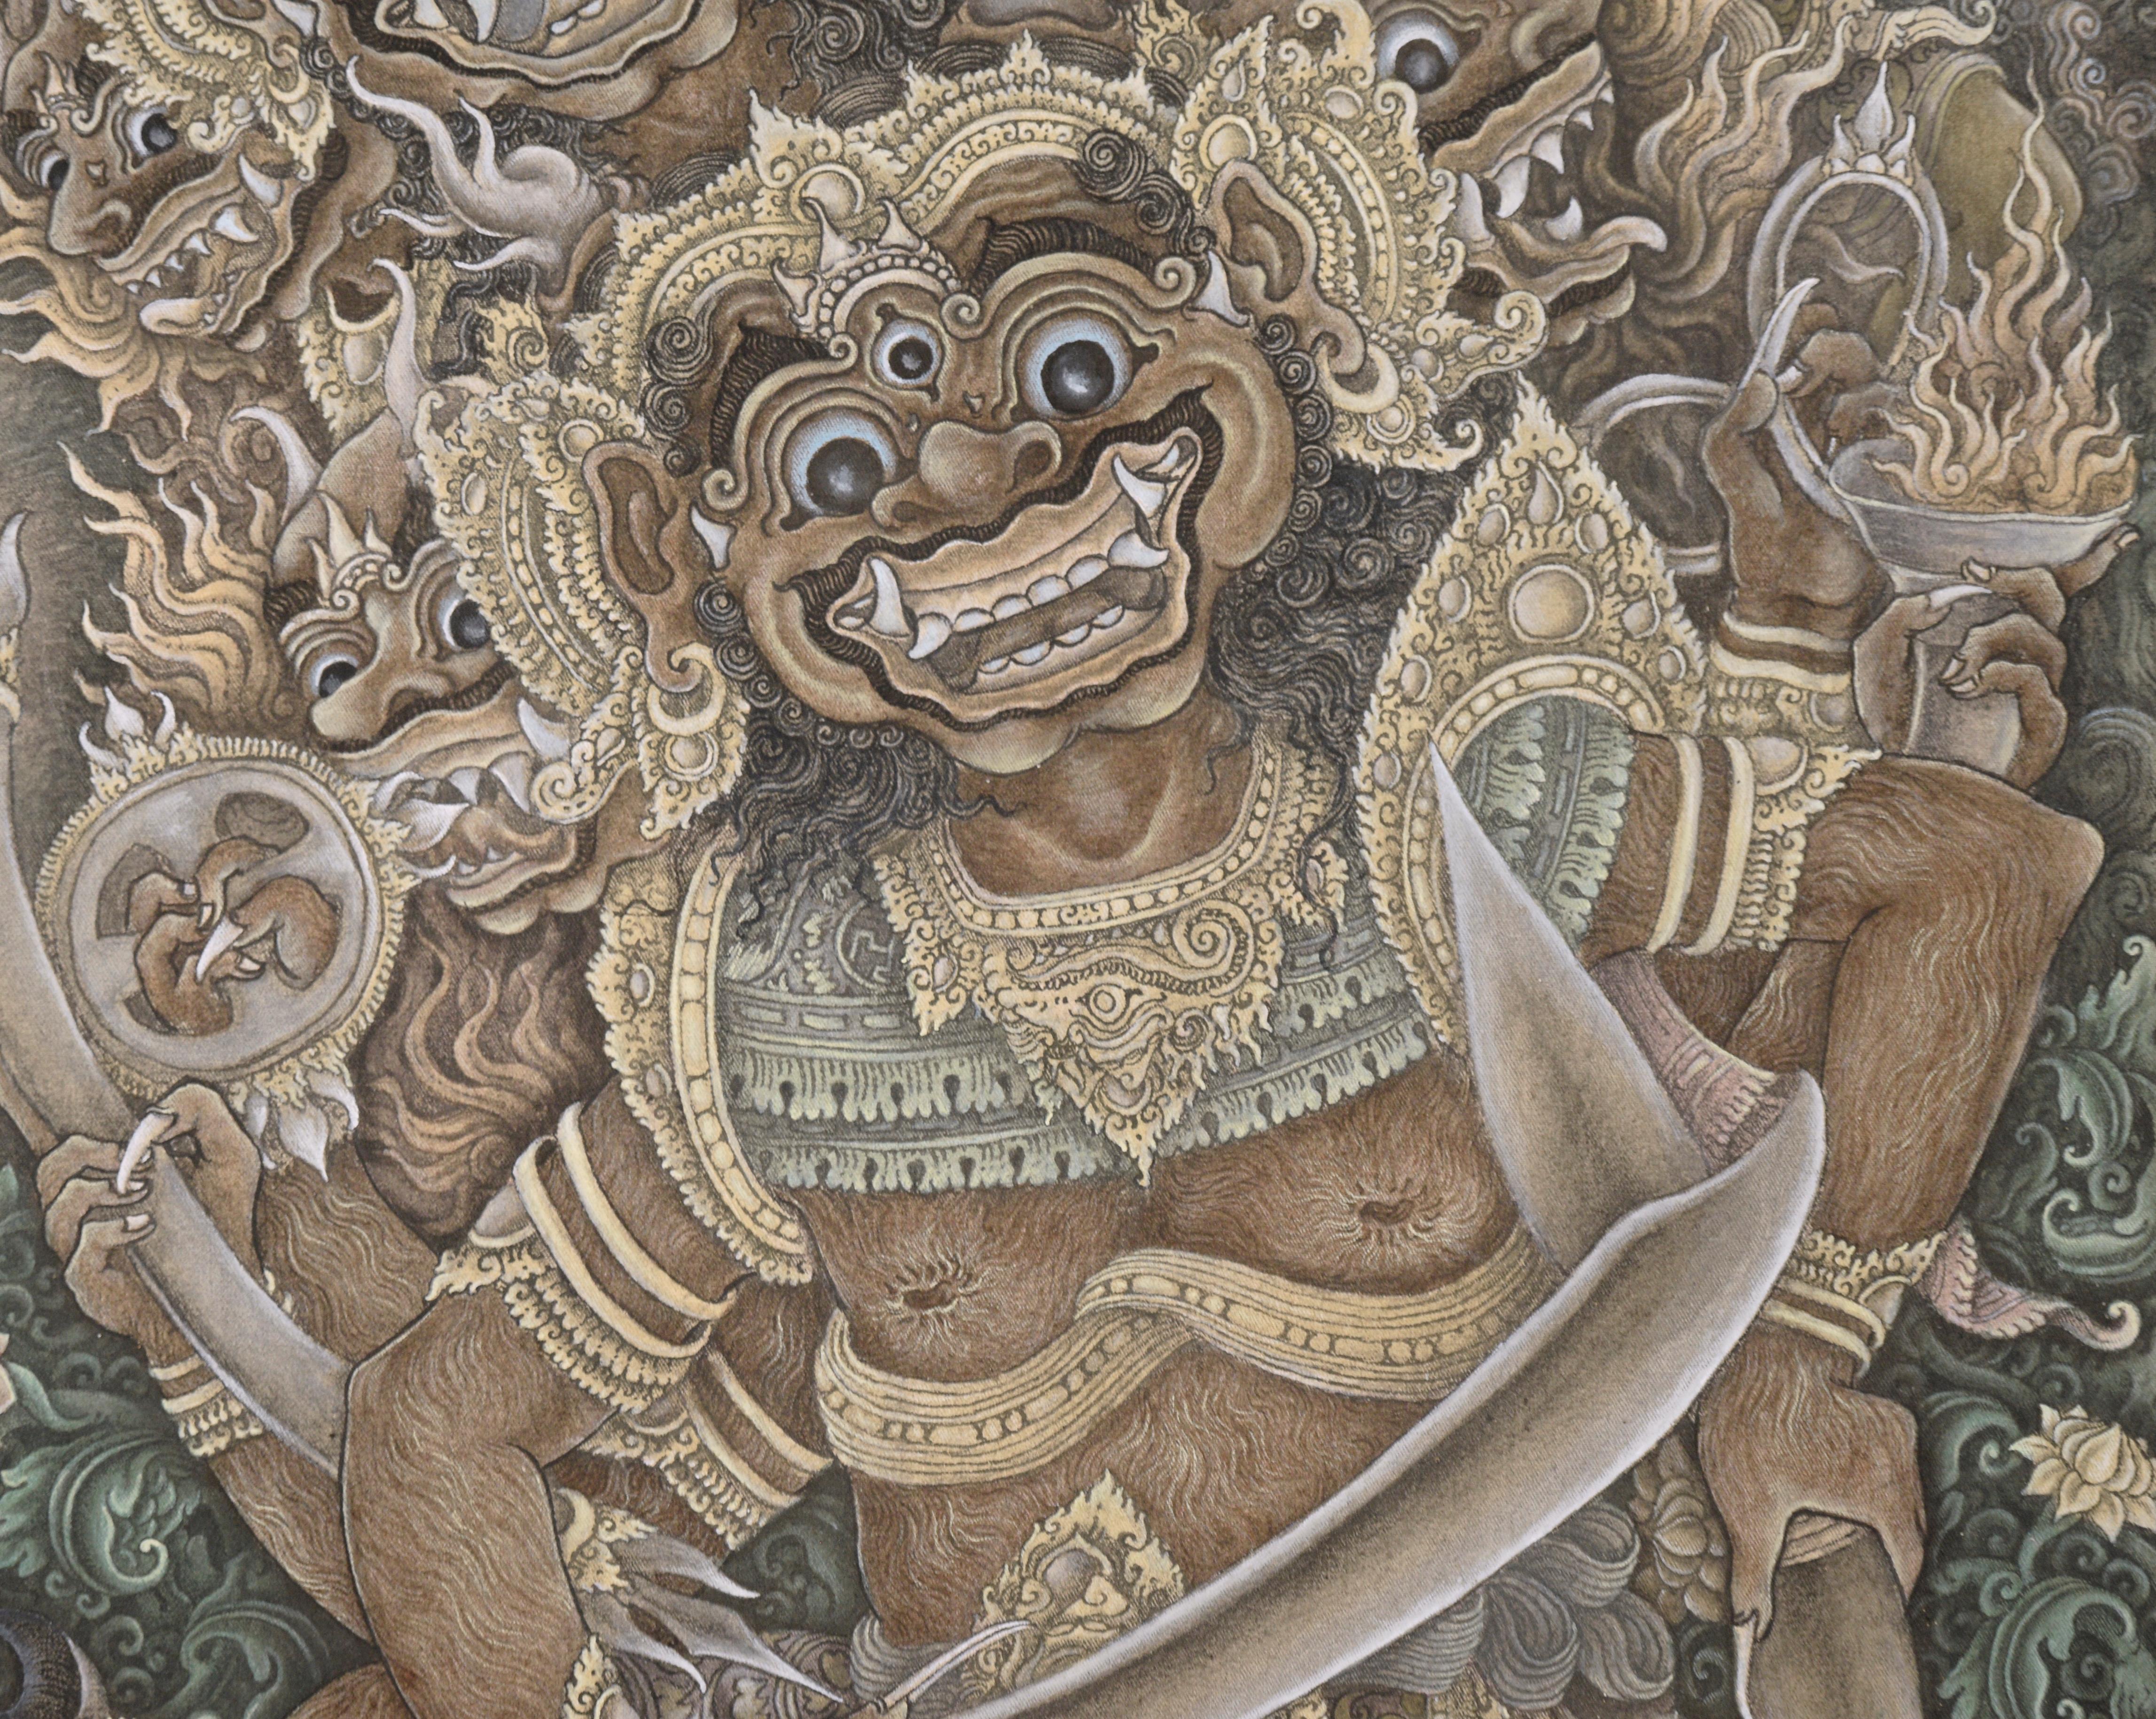 Incredibly detailed depiction of the goddess Kali appearing before a hunter by Konci (Balinese, 20th Century). Overflowing with details and imagery, this piece depicts the goddess Kali in the forest along with other godlike figures. A hunter is